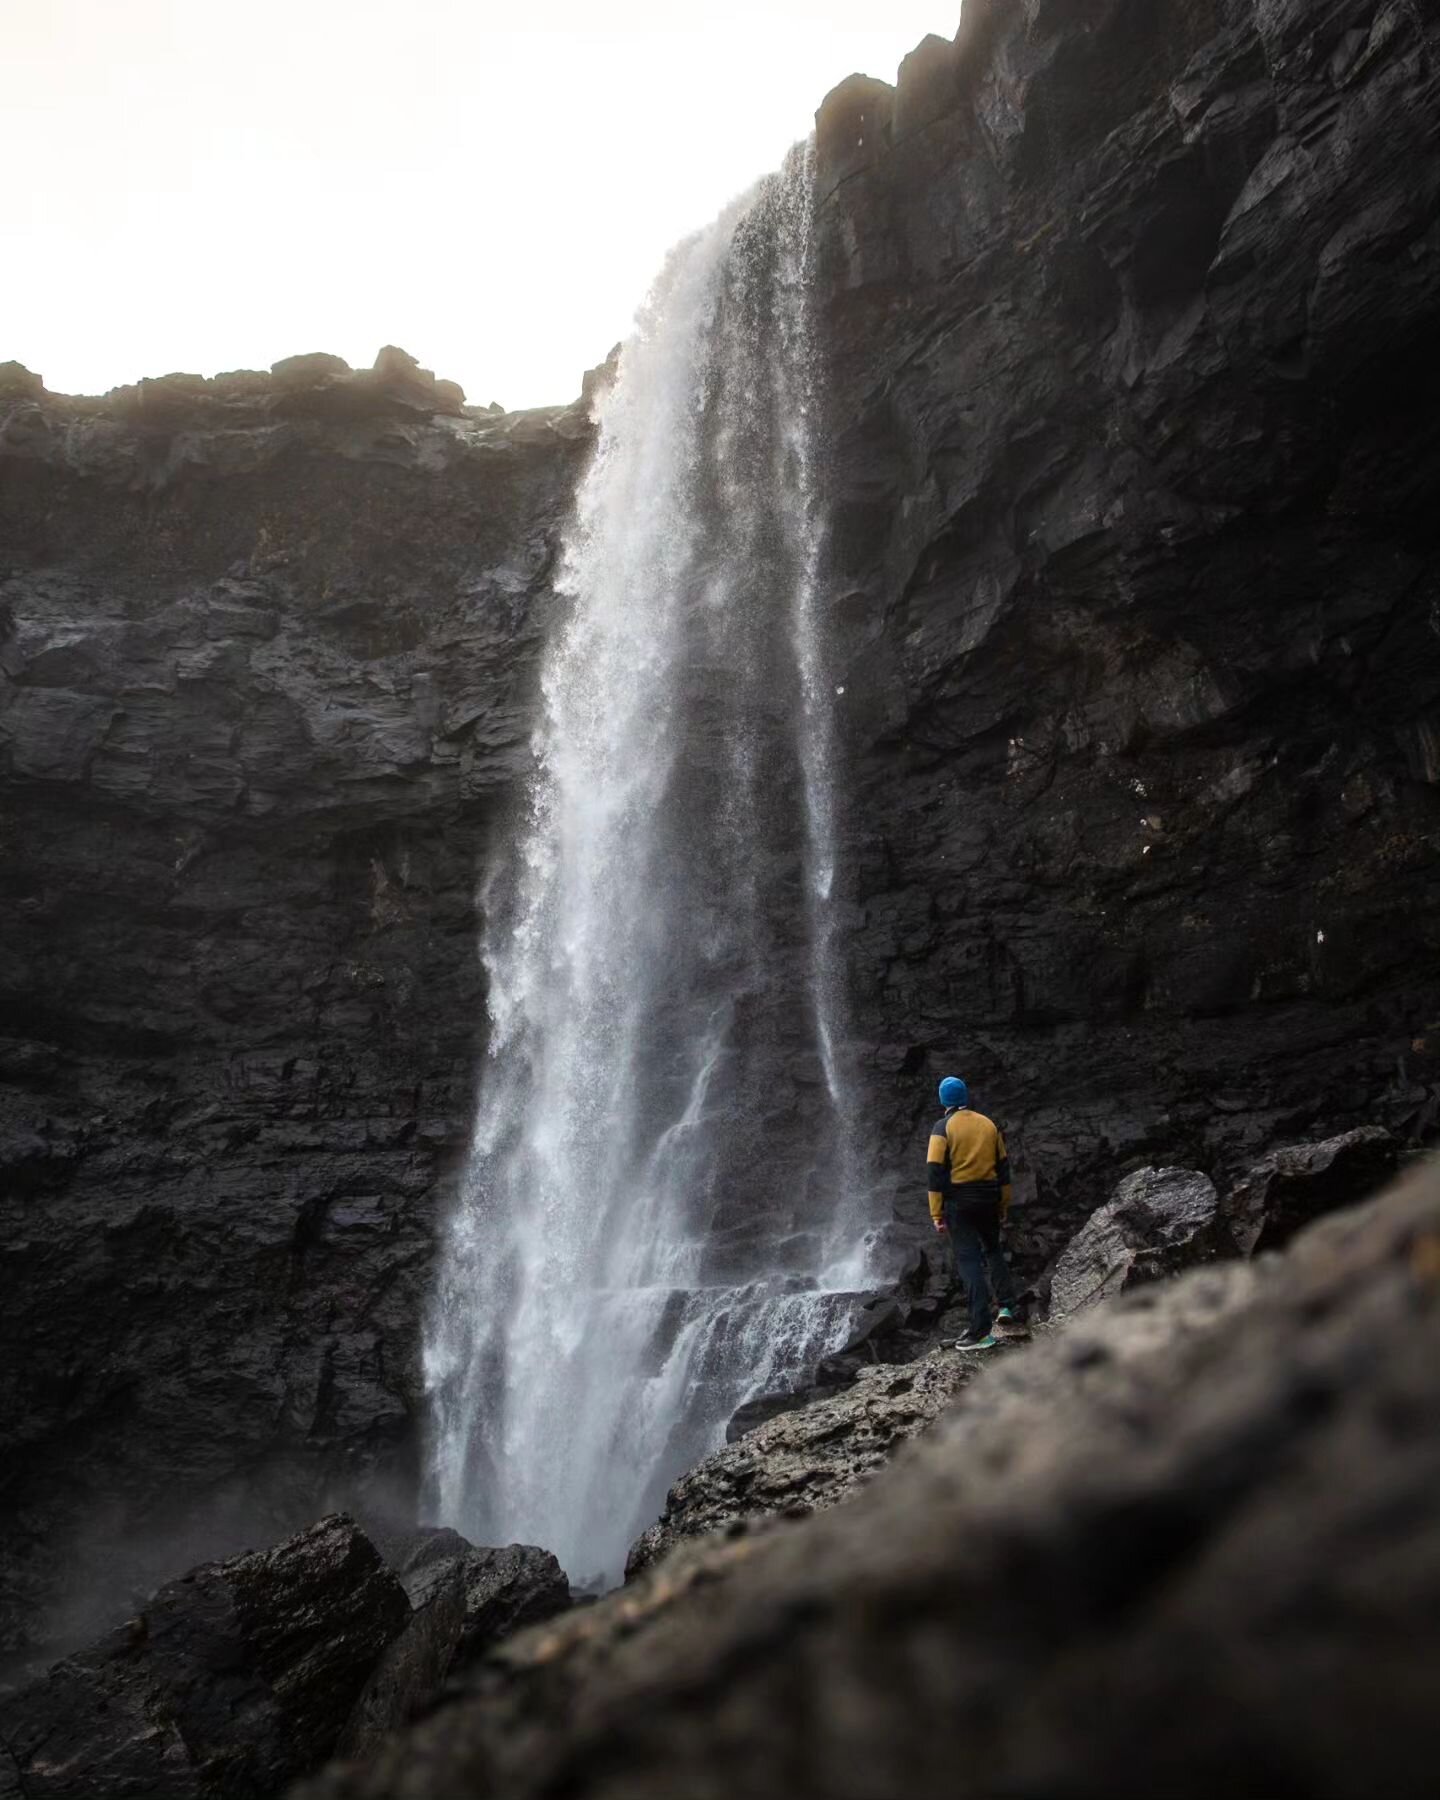 Don't go Jason Waterfalls 🚿🚿🚿
At 140 meters, Foss&aacute; is the highest waterfall in the Faroe Islands, and also one of the biggest attractions in northern Streymoy. It cascades beautifully down the mountain in two sections.